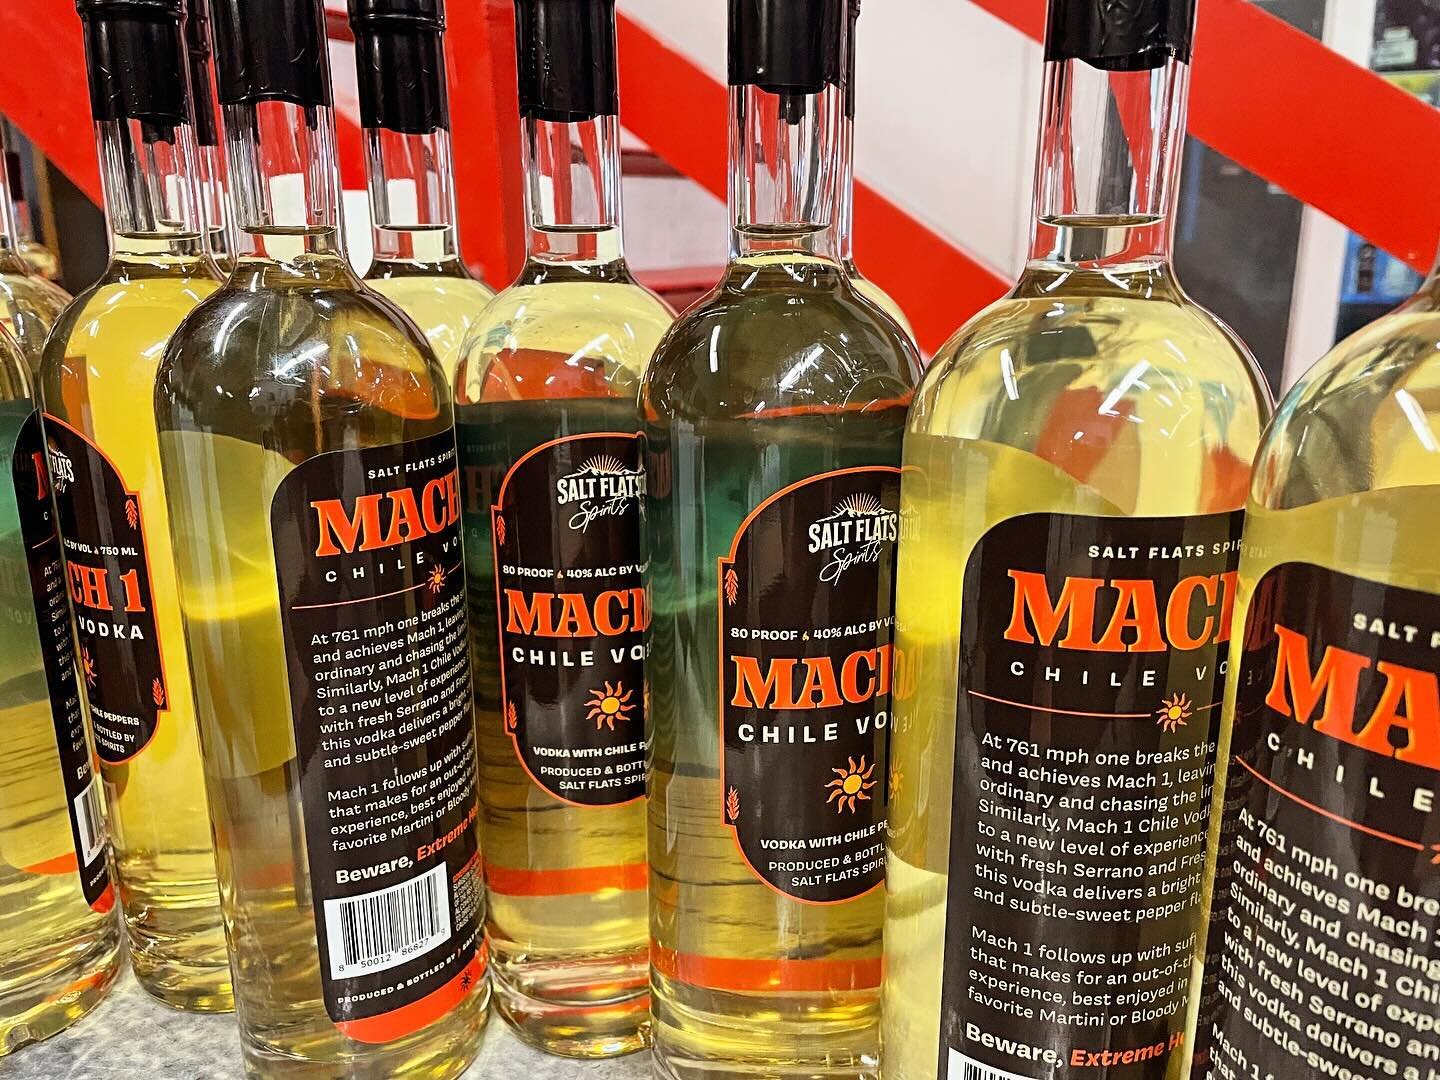 Did you hear the news? Mach 1 Chile Vodka is being sold at liquor stores statewide and coming to a store near you! Stay tuned 👀
.
.

.
.
#mach1 #chile #vodka #spirits #saltflatsspirits #gold #winner #saltflatsspirits #americancraftspiritsawards #202